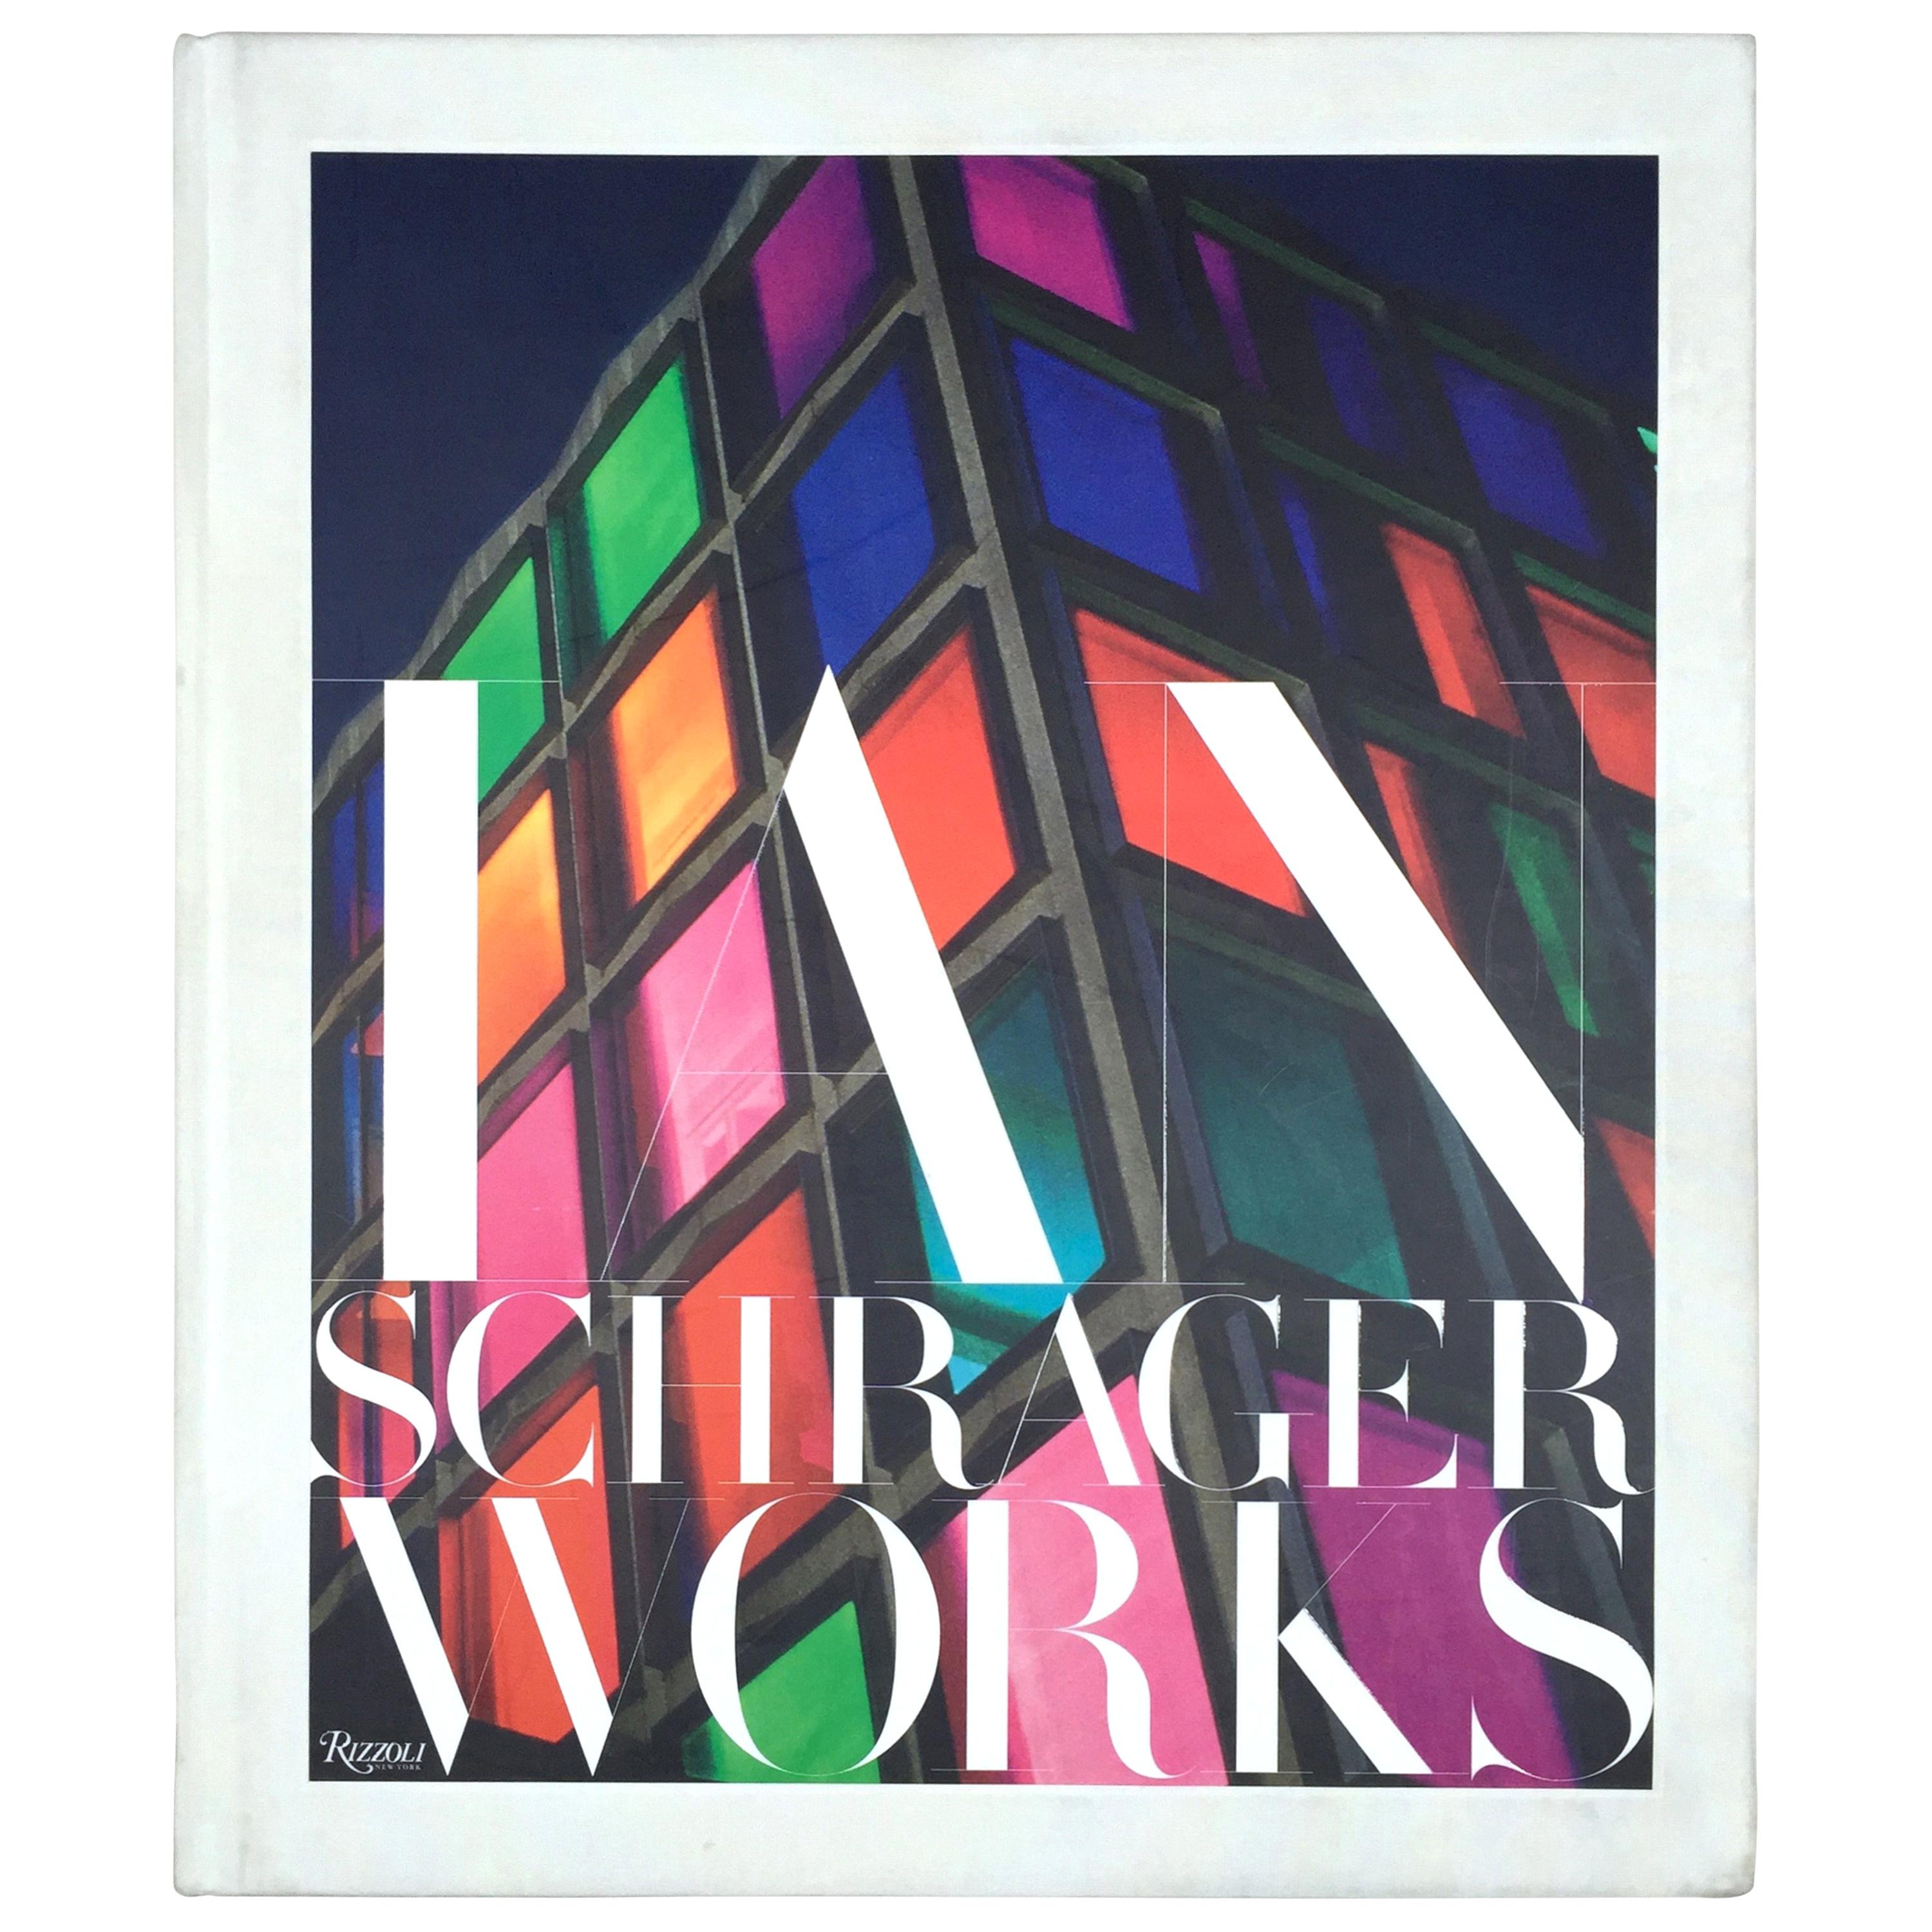 Ian Schrager, Works 'Signed', 2015